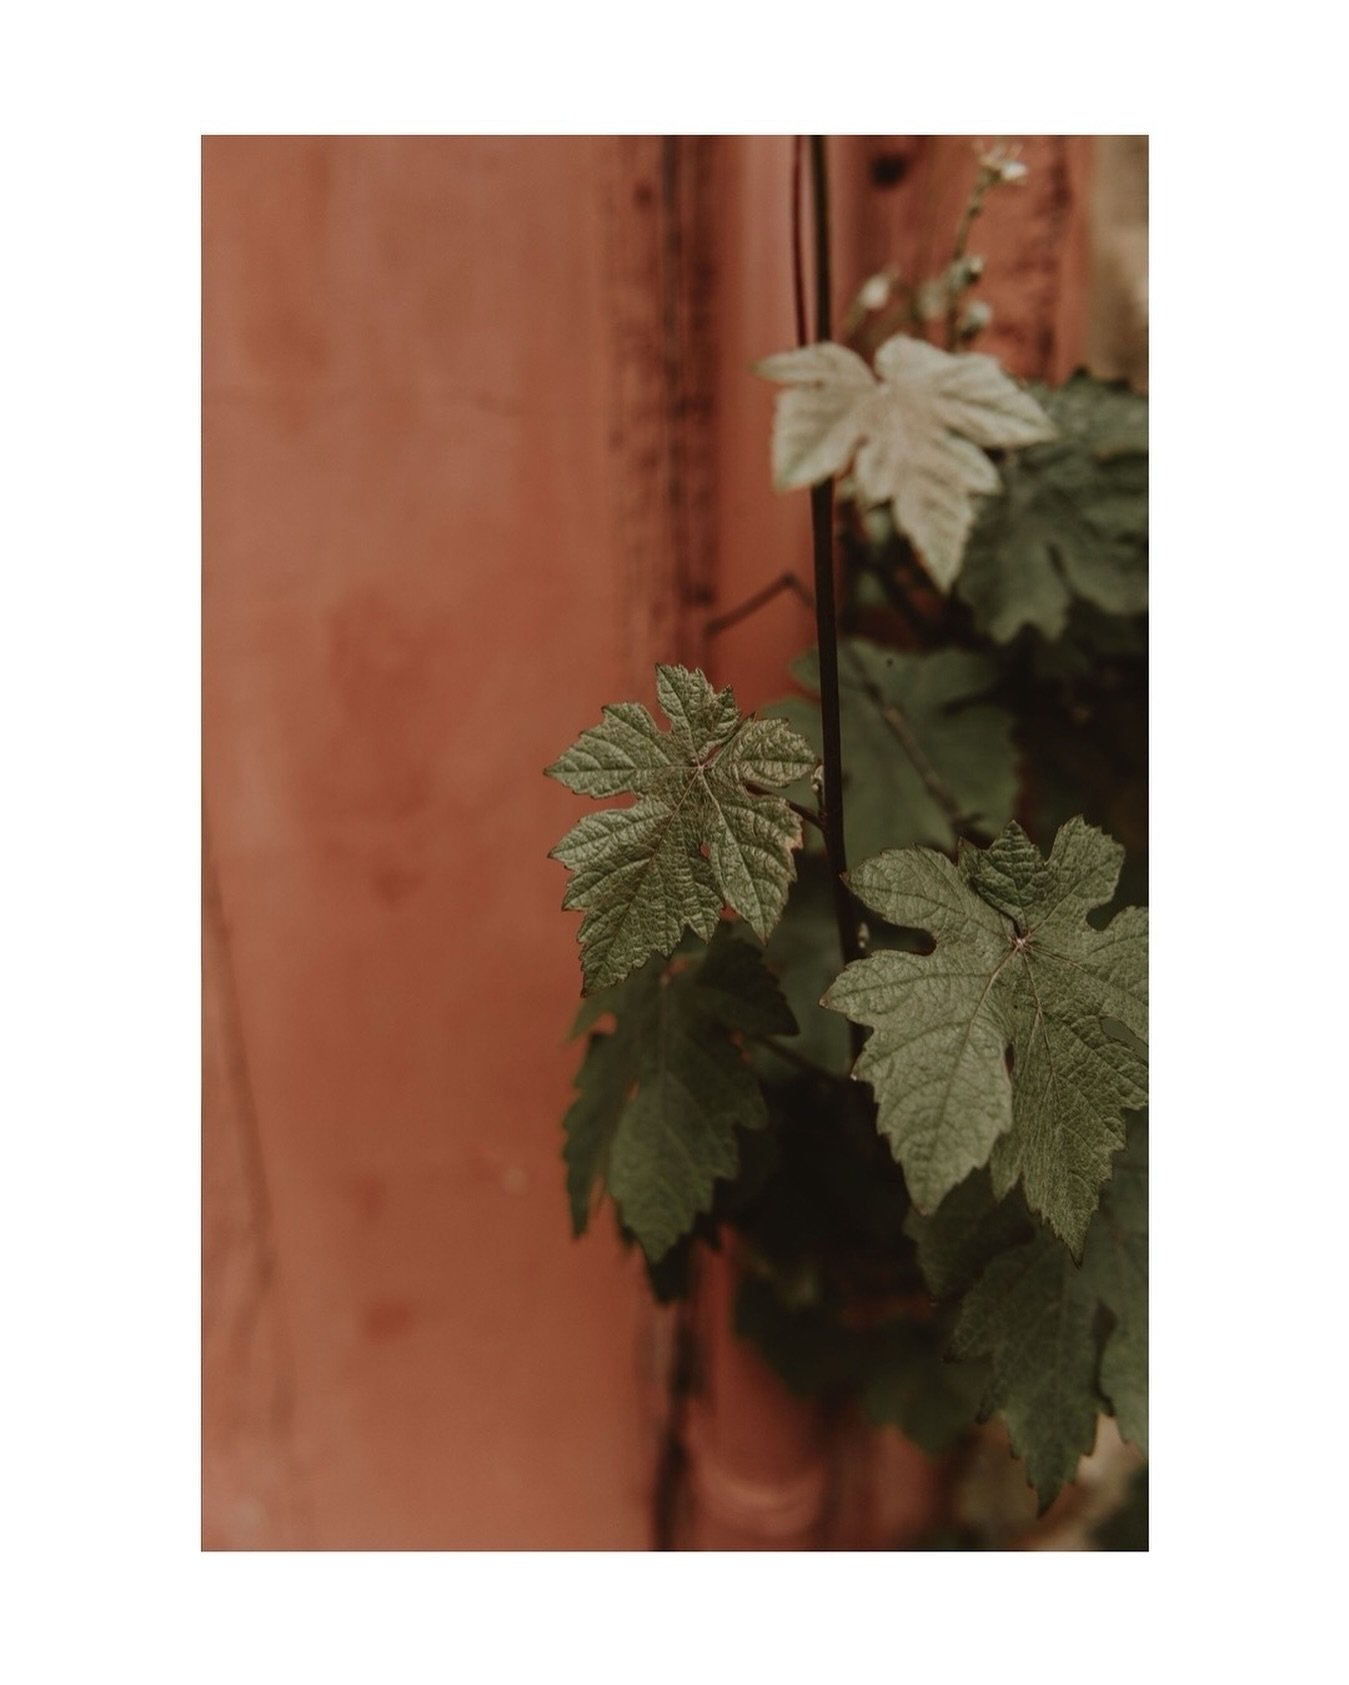 Vines on pink walls.. what&rsquo;s not to love?

A tiny snippet from my work for @fablefaine this week.. lots more to share as I head countrywide finding the best places for your photoshoots&hellip;

#countrysidephotography #countryliving #countrylif